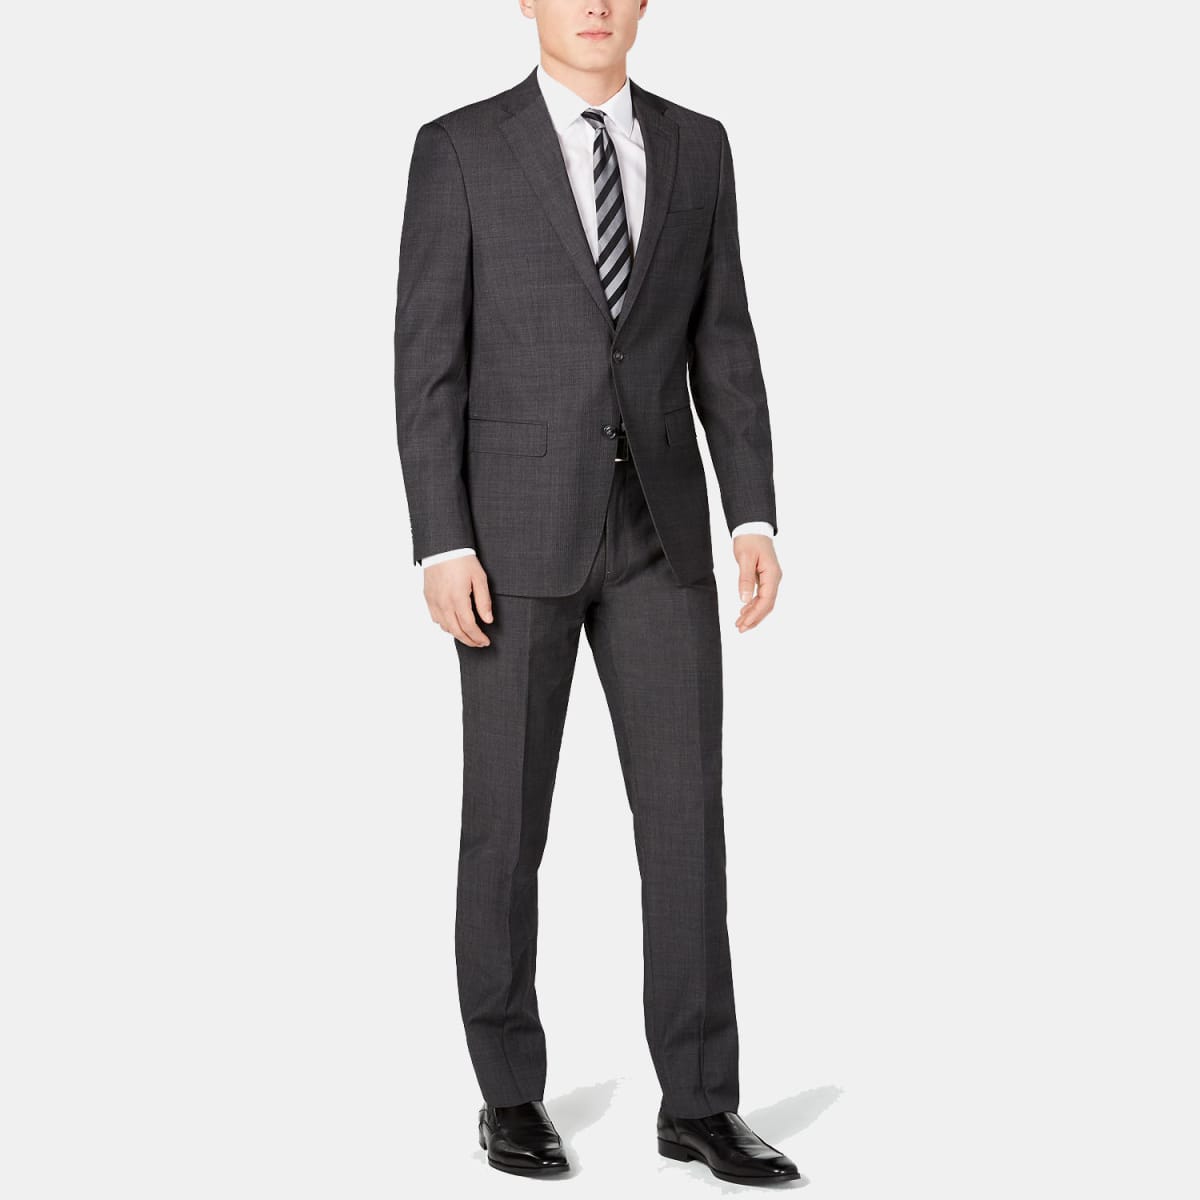 Get A Calvin Klein Slim Fit Suit For Under $200 At Macy's - Men's Journal